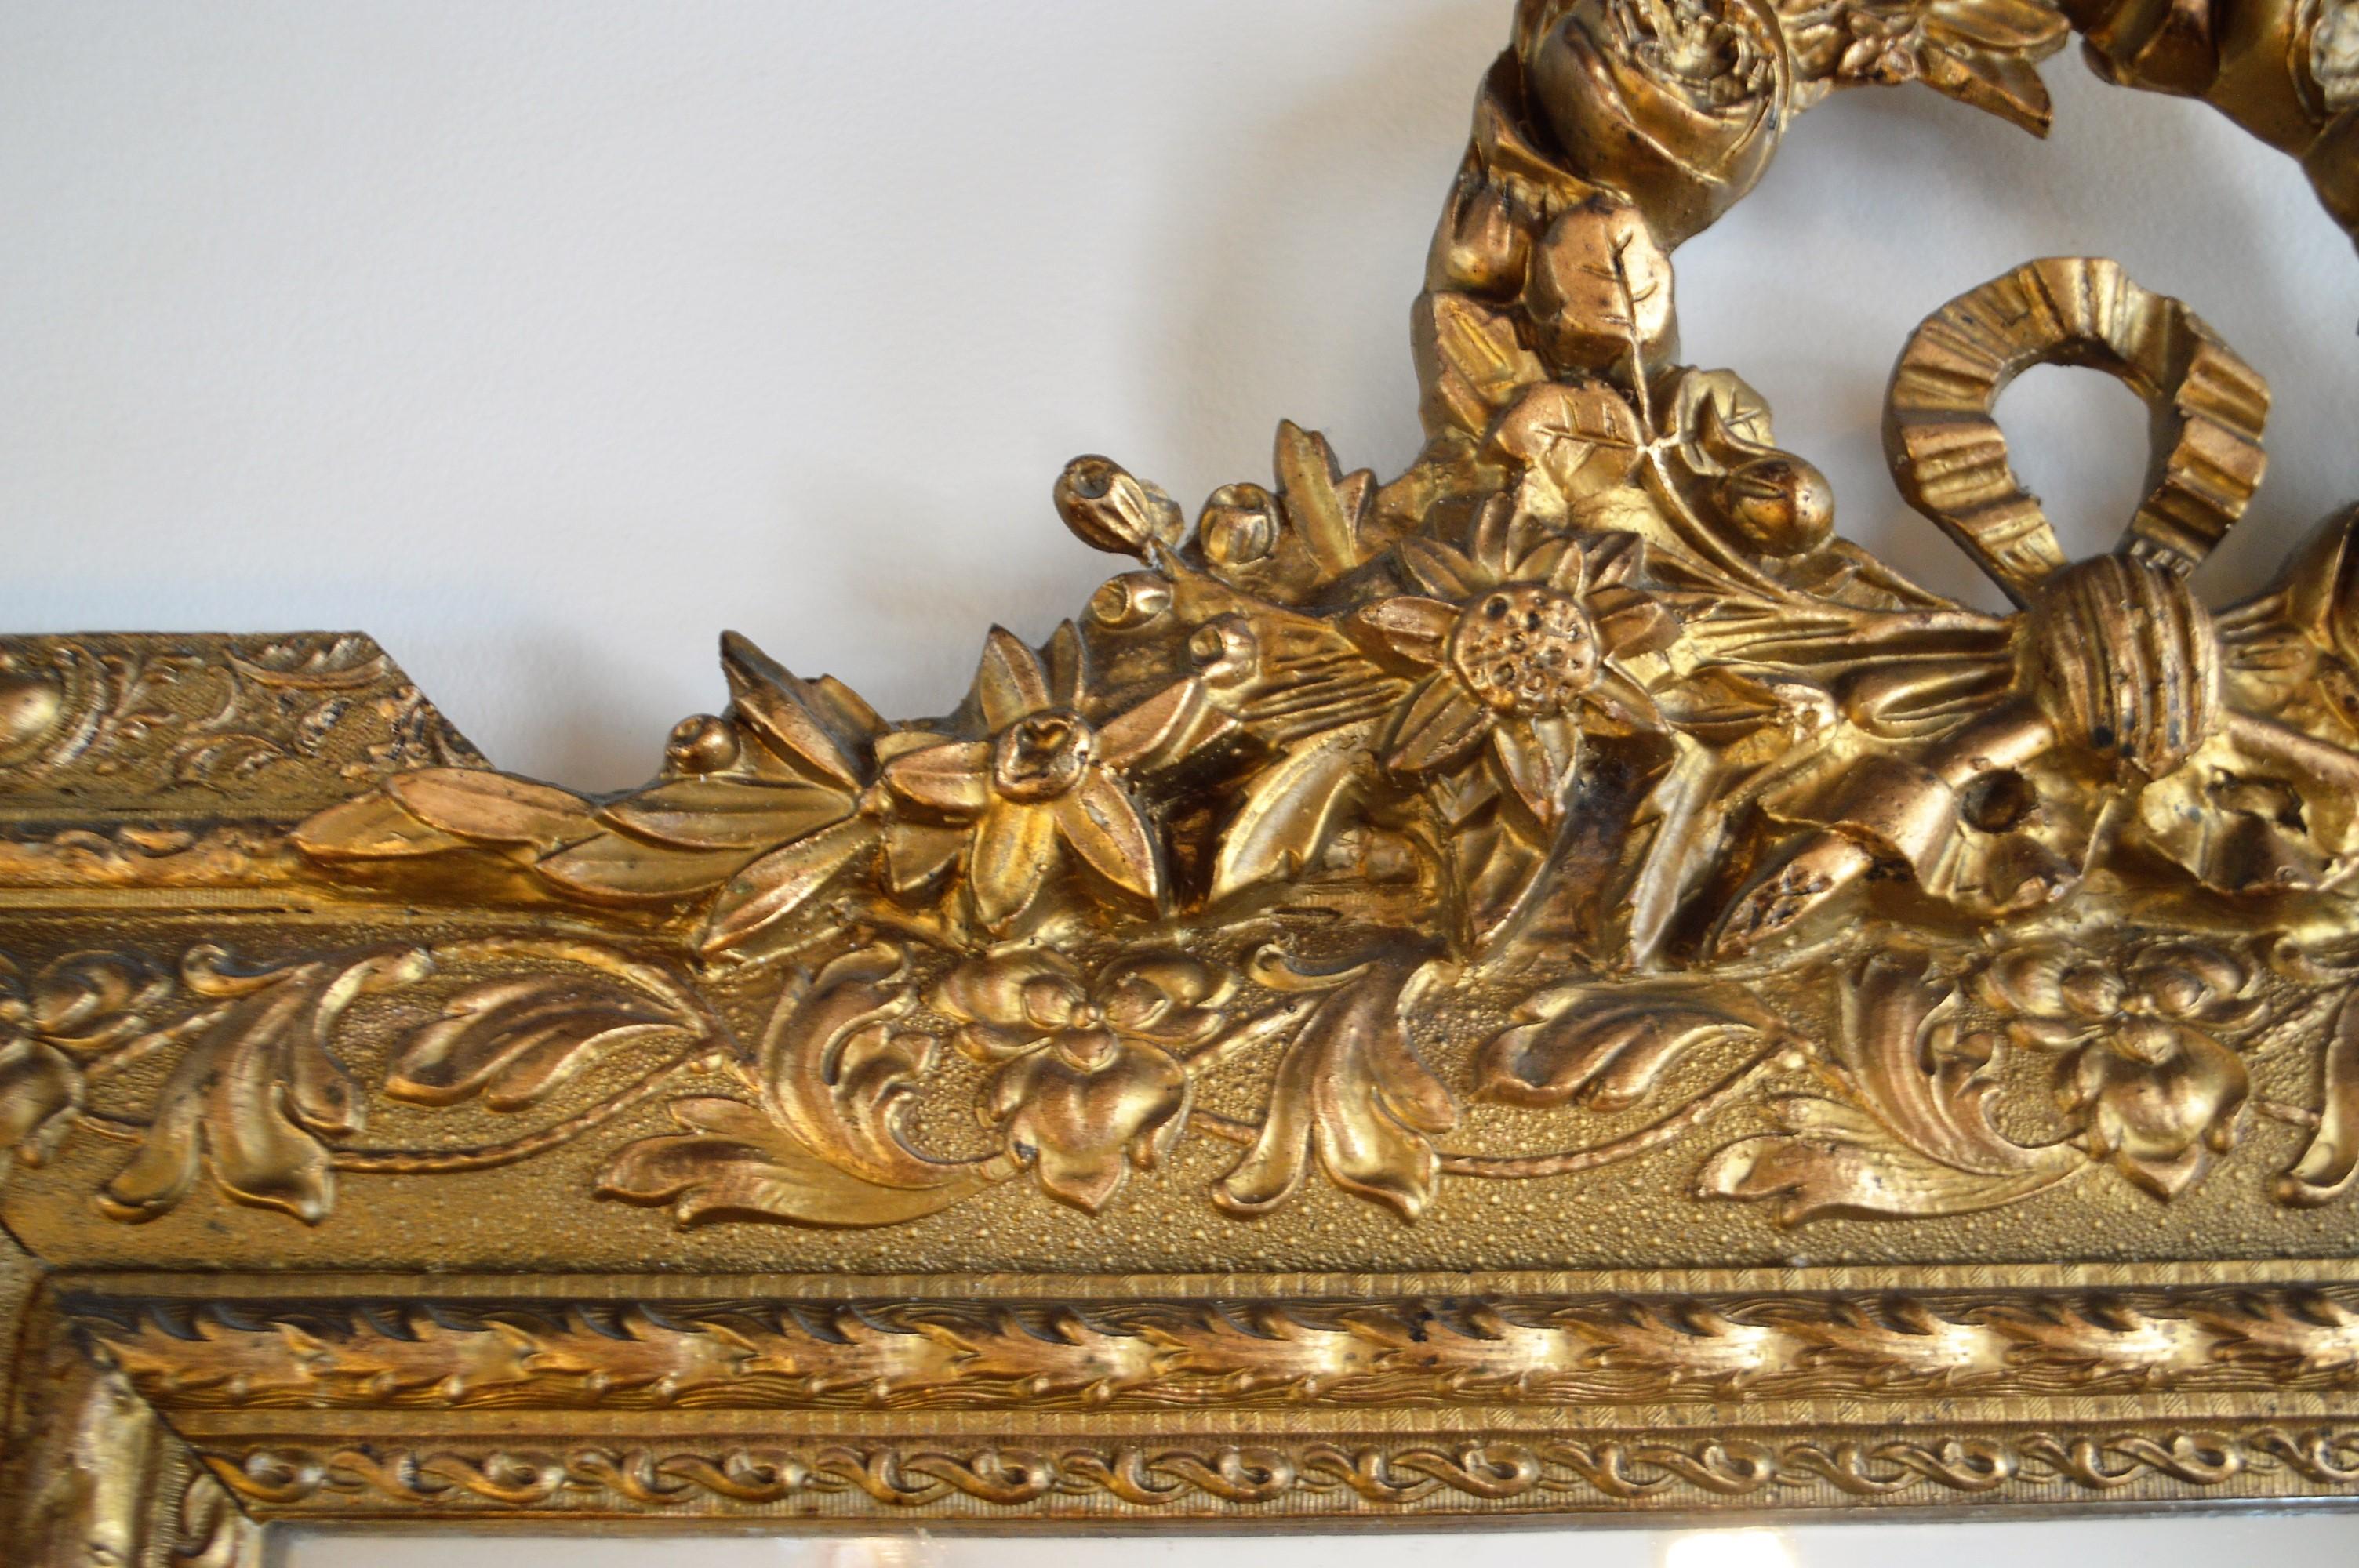 Gilt Louis XVI Style Wood Gilded Mirror with Wreath Decorative Top and Carved Frame